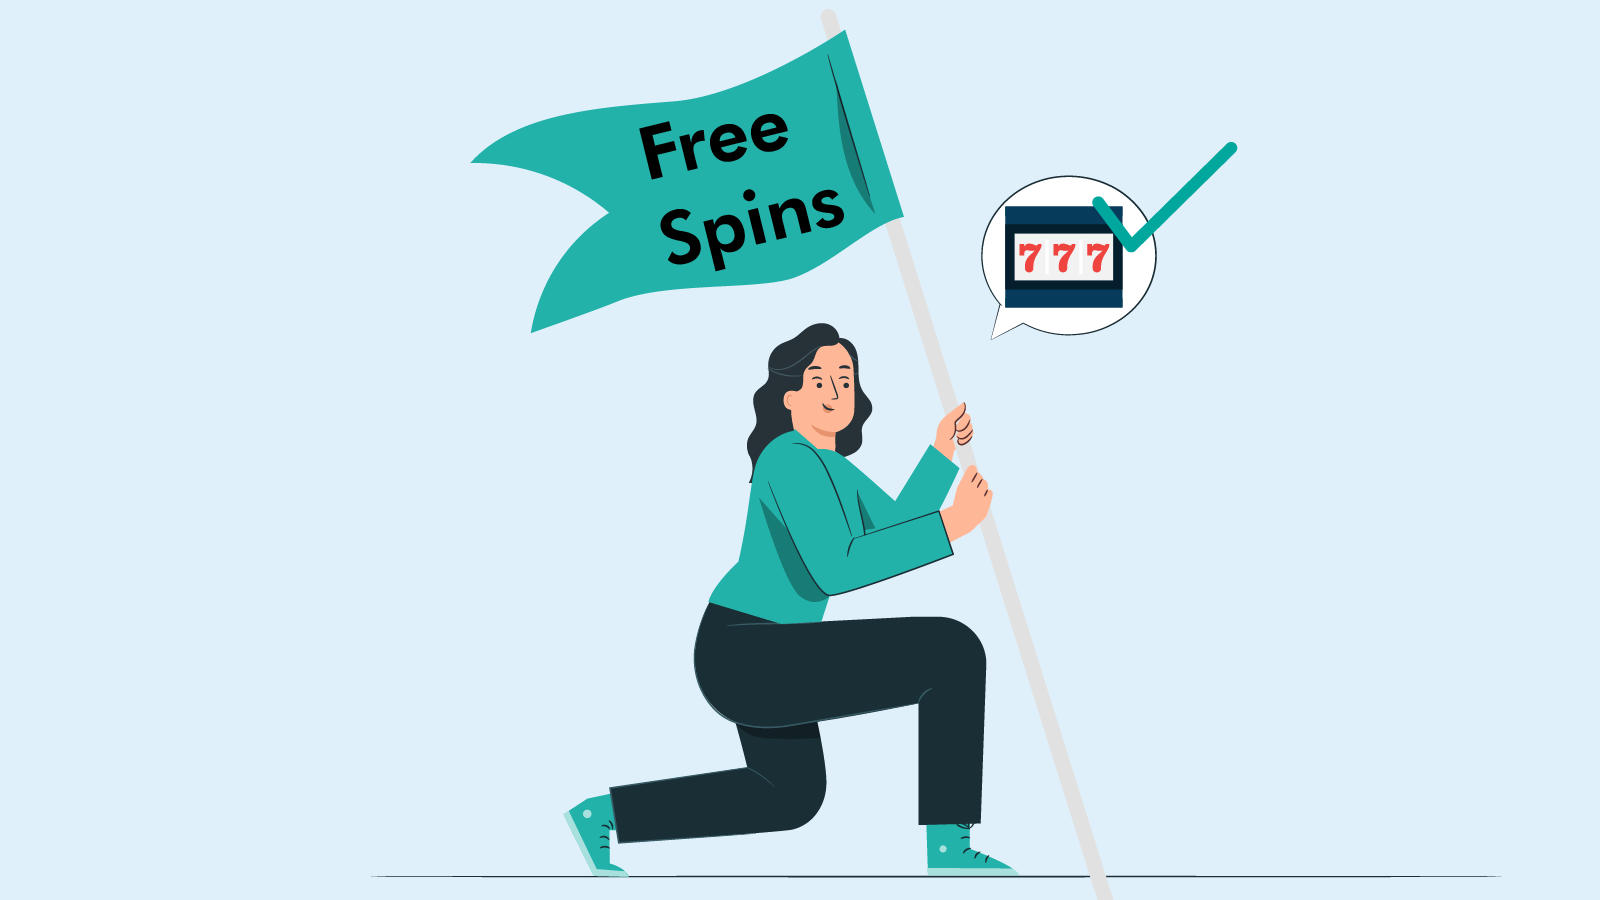 All about 50 free spins from our experts